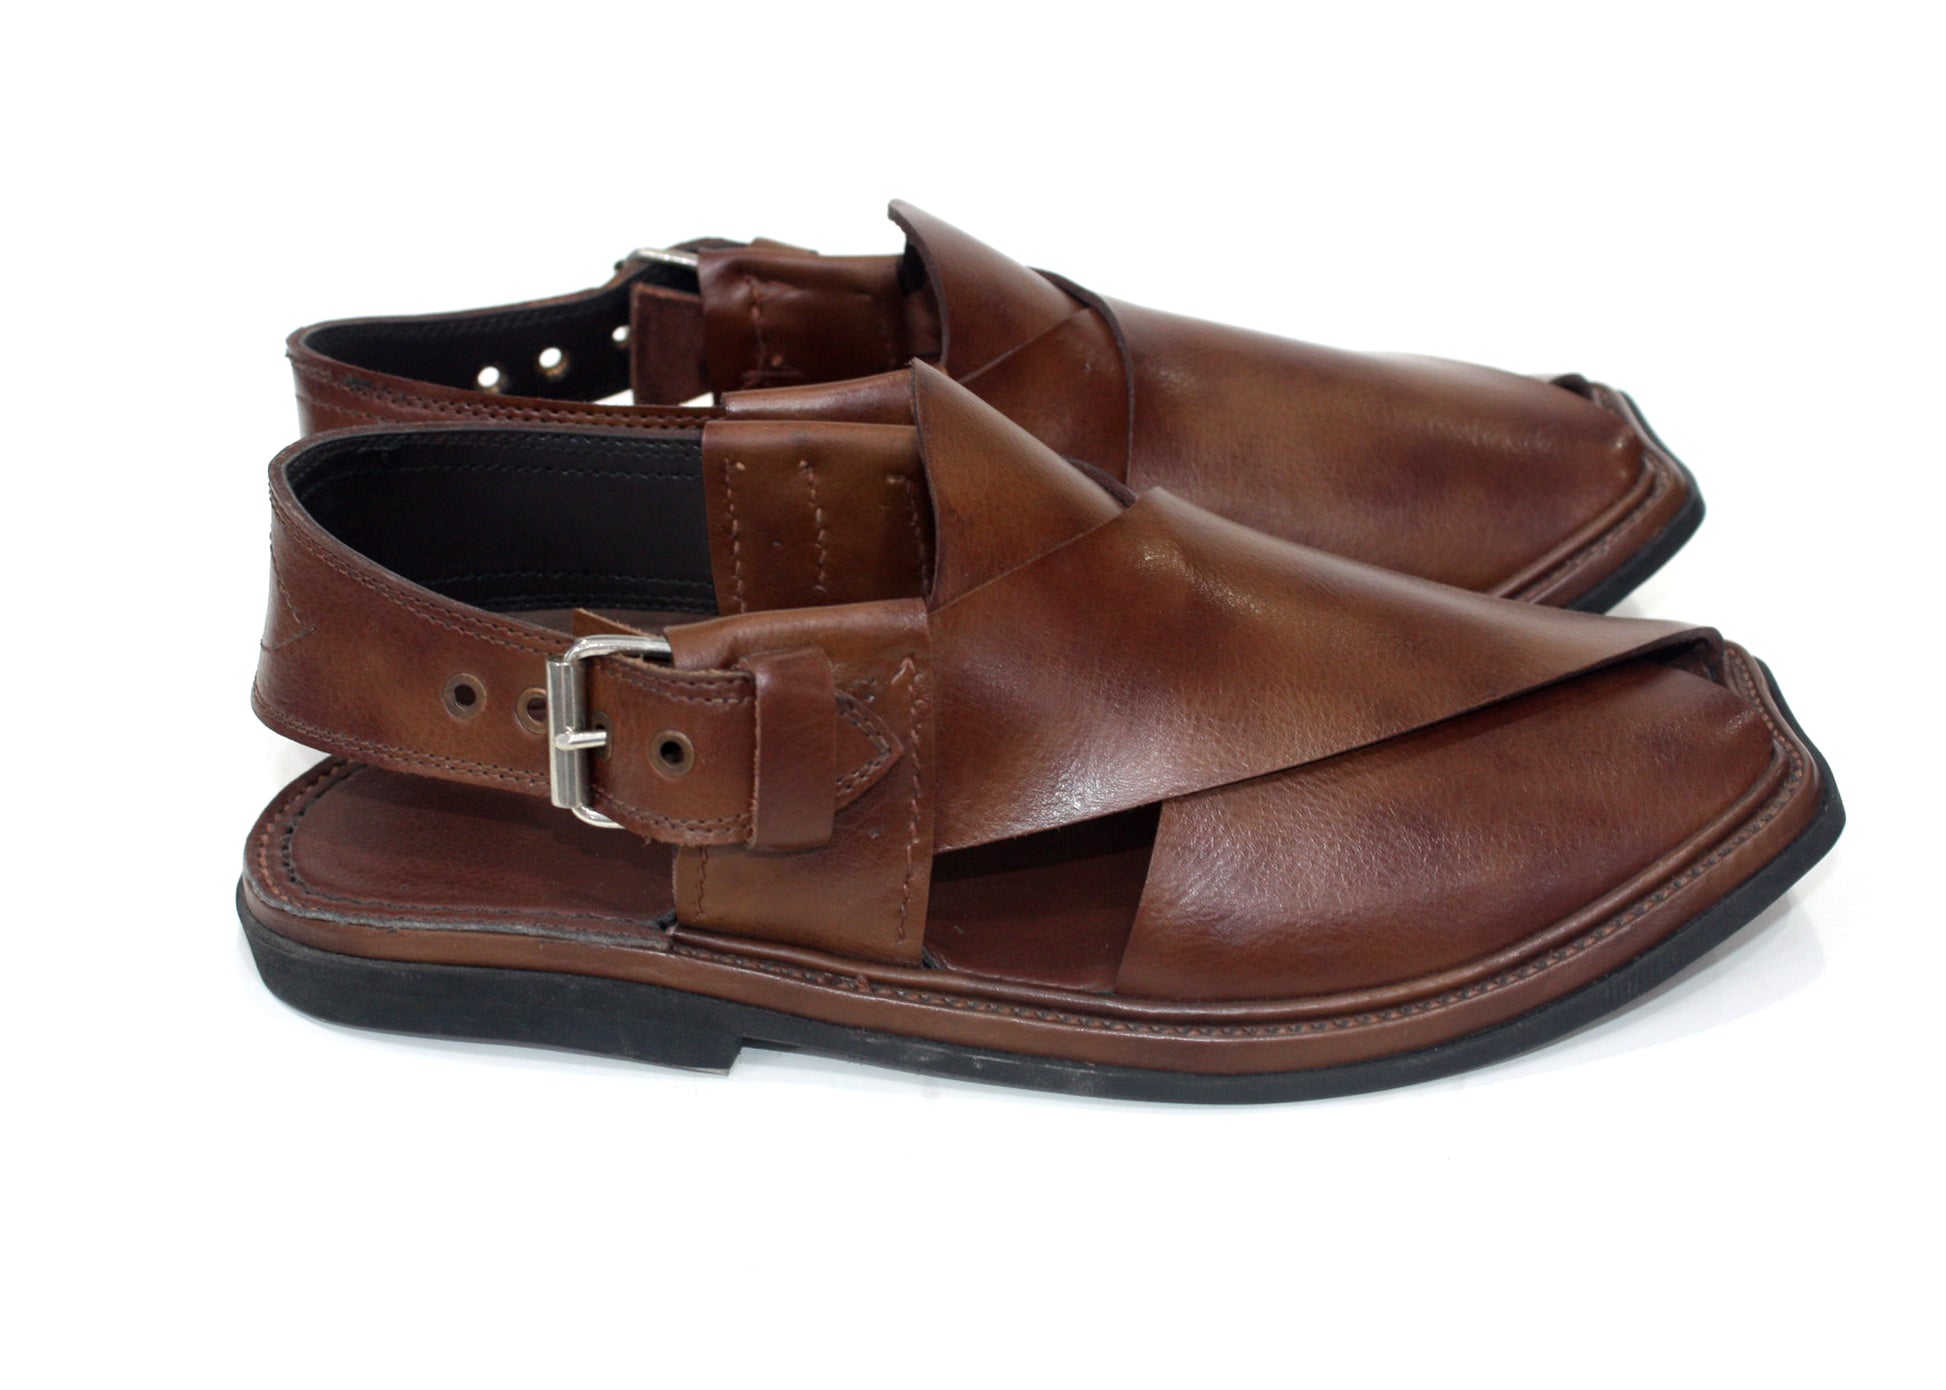 Traditional Handcrafted Brown Leather Peshawari Chappal from Charsadda